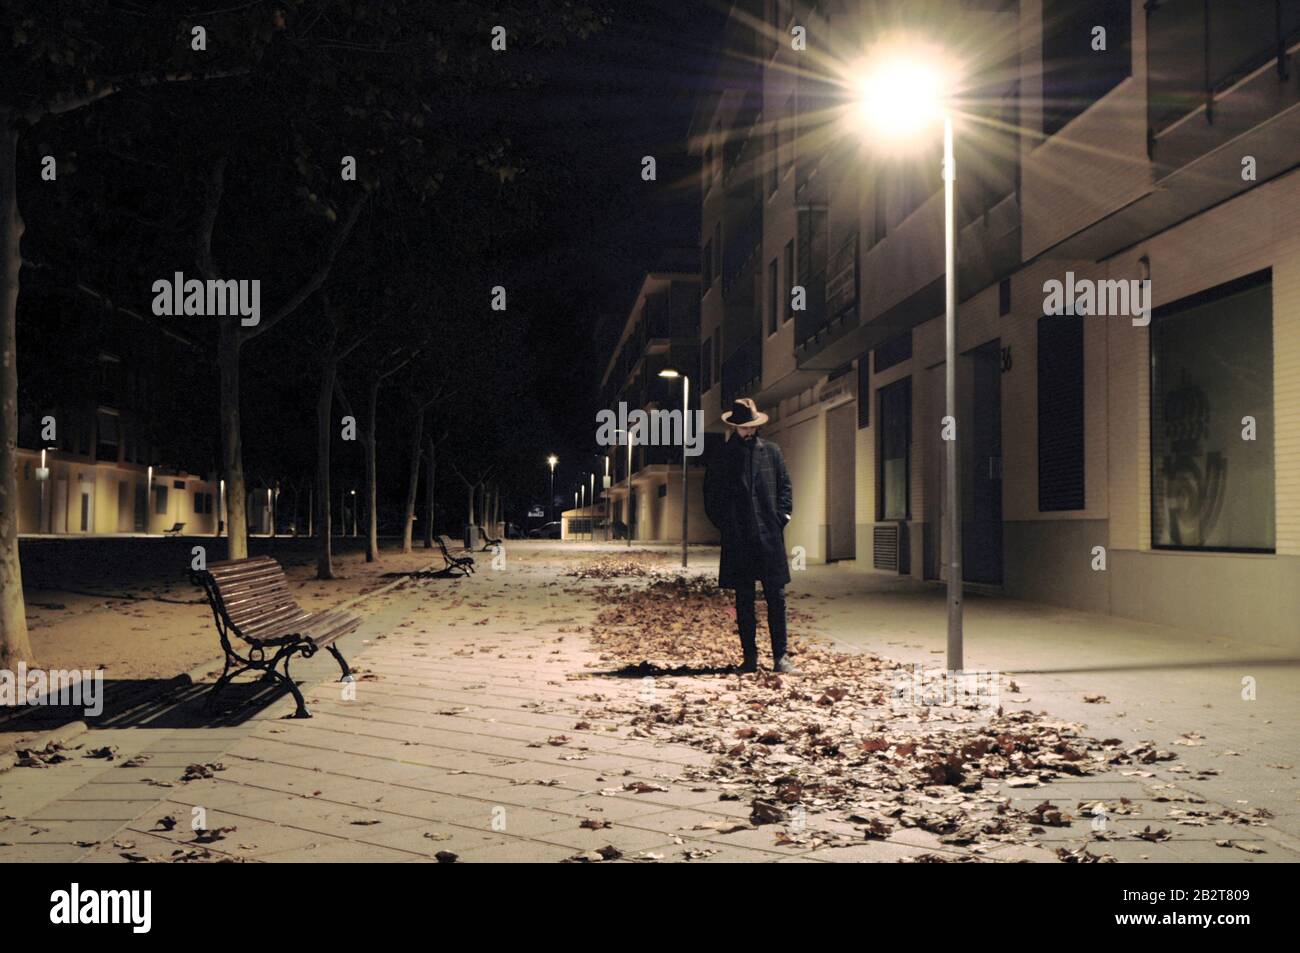 man wearing suit and hat on a Spanish street with his head down under the light of a lantern and dry leaves all over the ground/ Abstract imagery Stock Photo